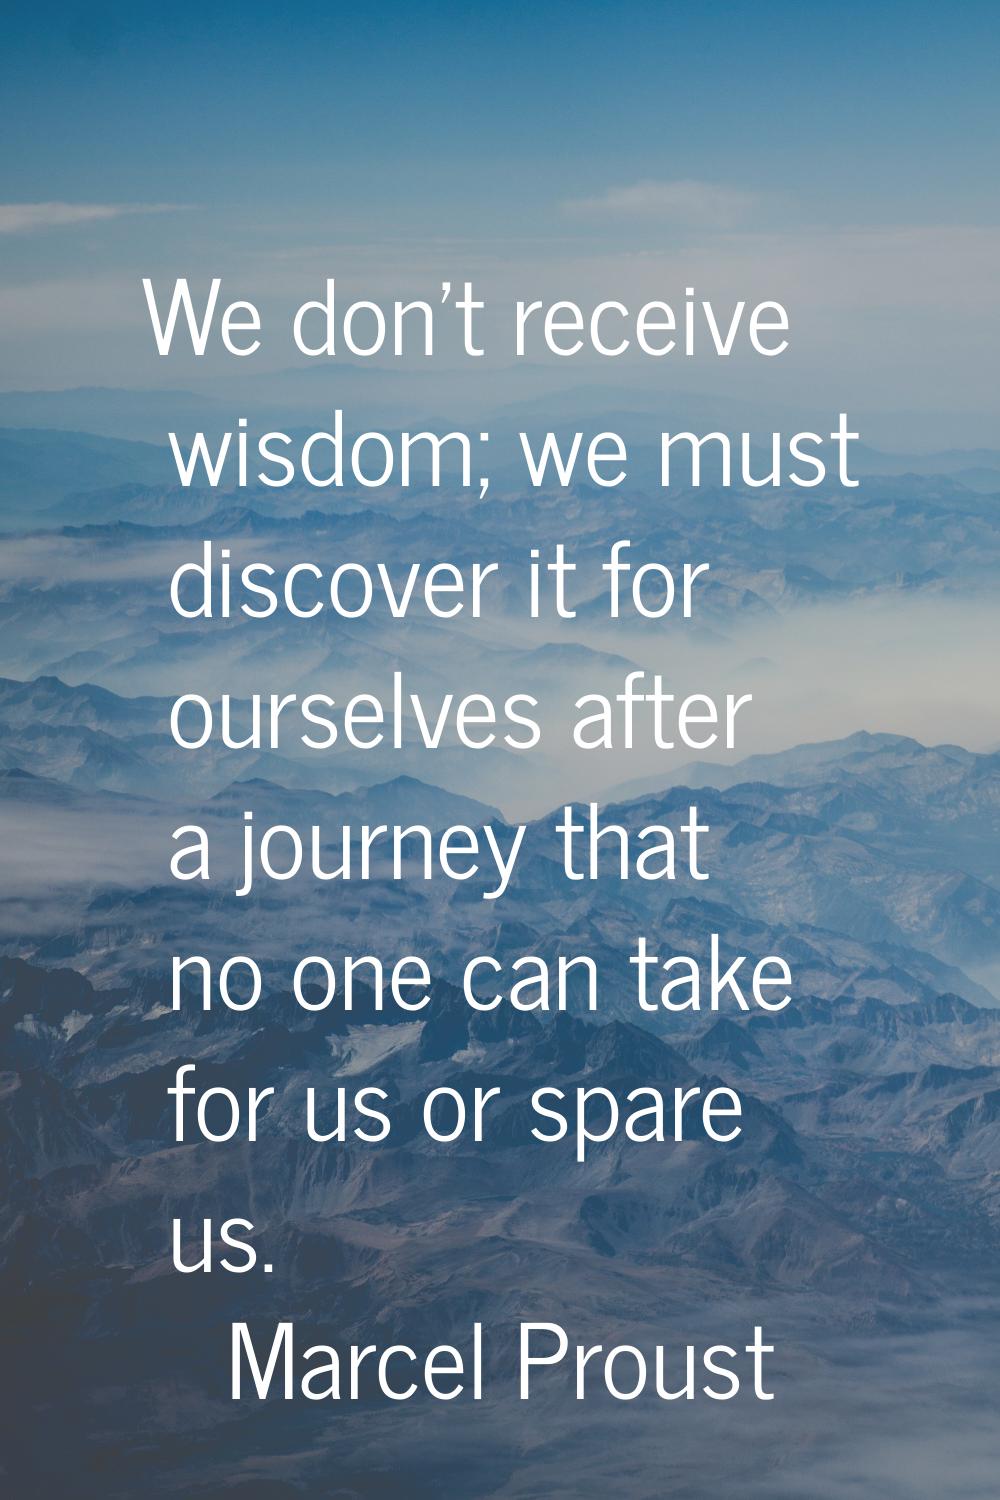 We don't receive wisdom; we must discover it for ourselves after a journey that no one can take for